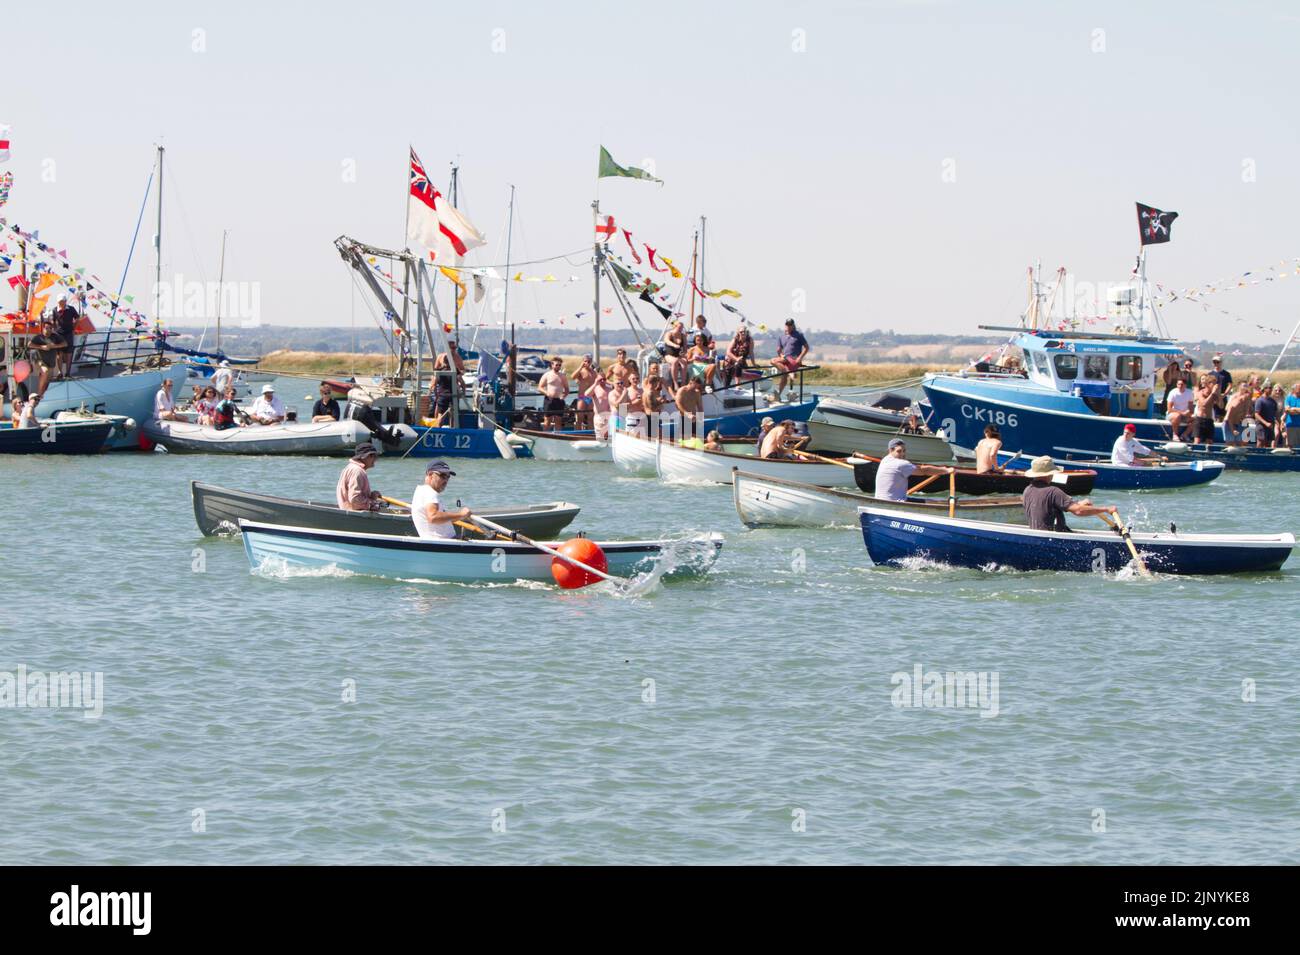 West Mersea regatta on Mersea Island in Essex. The regatta has been run almost continually since 1838 and is organised by volunteers. Rowing race. Stock Photo